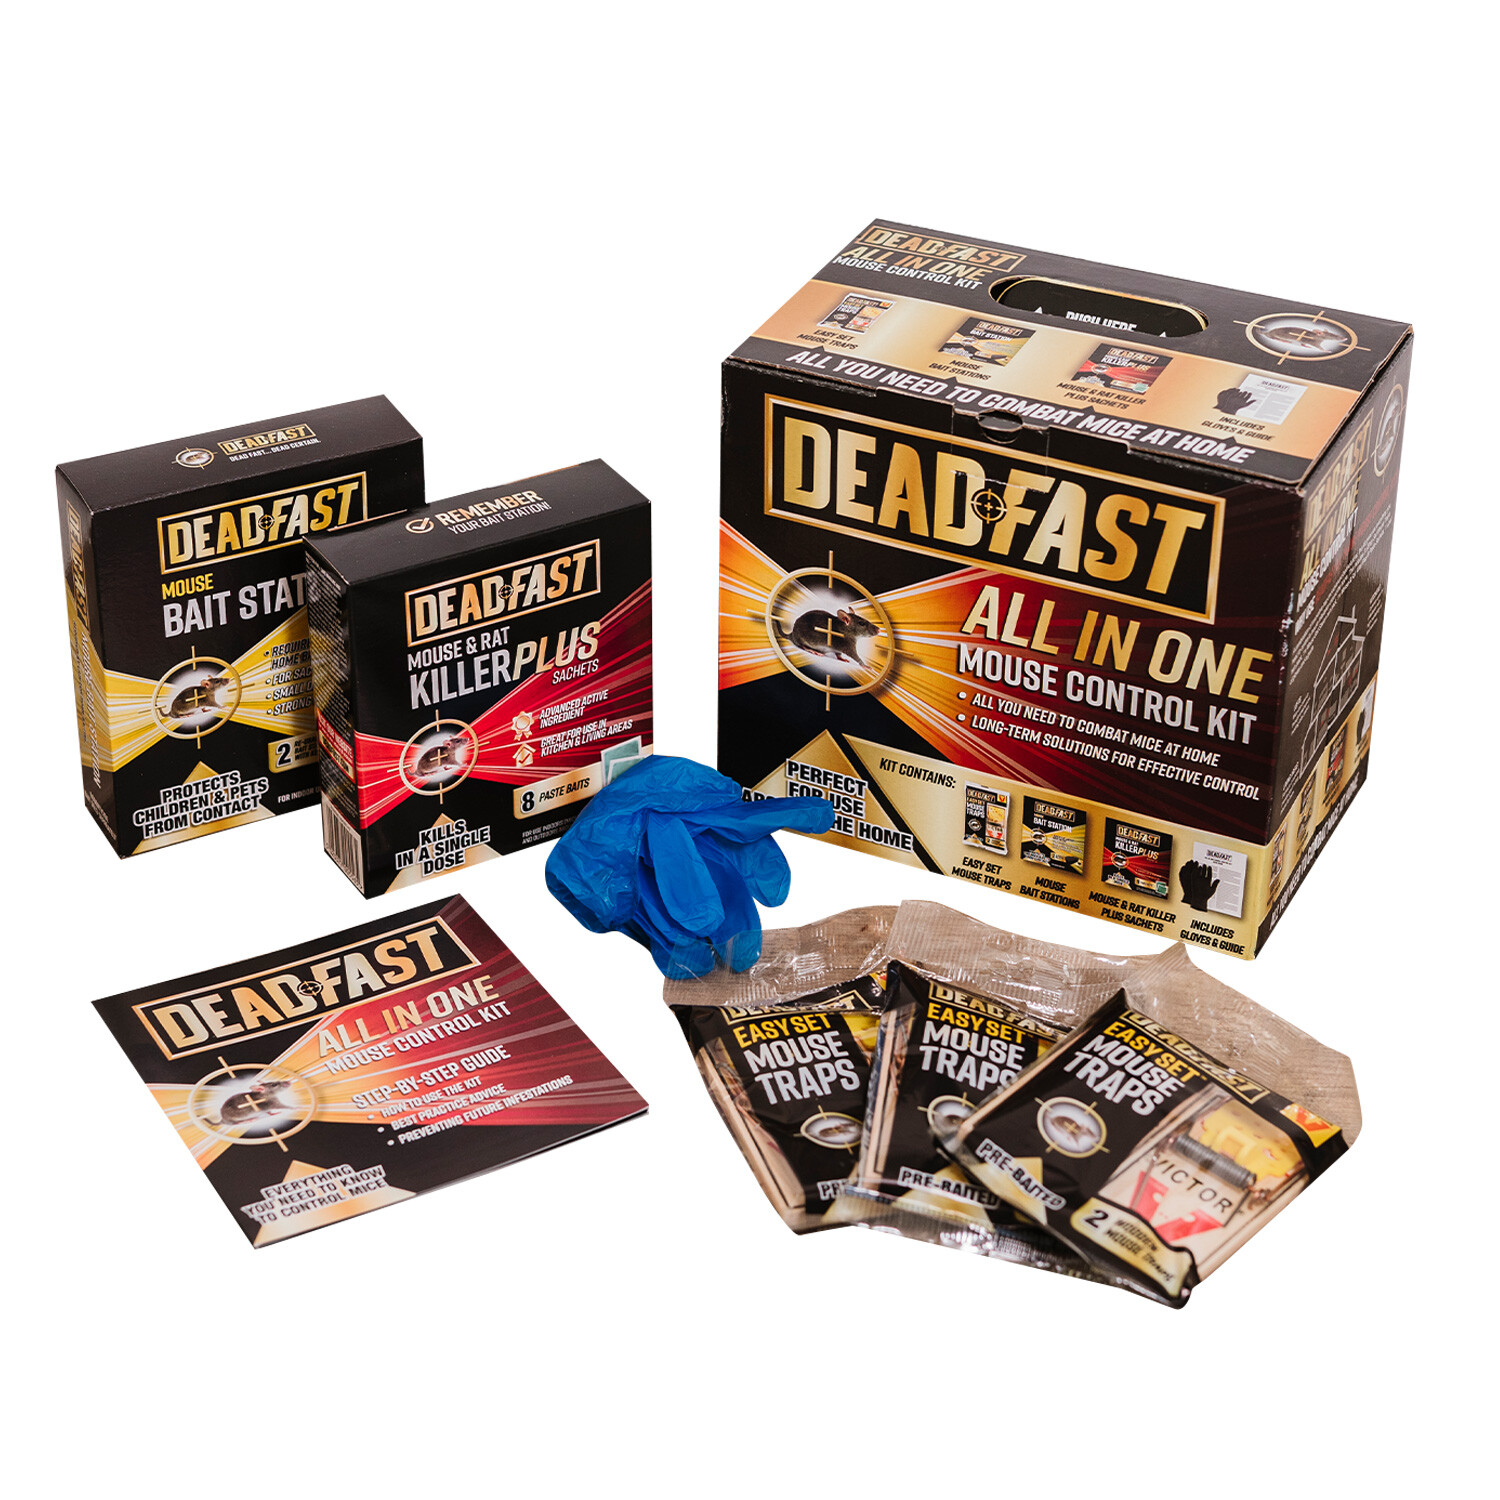 Deadfast All In One Mouse Control Kit Image 1